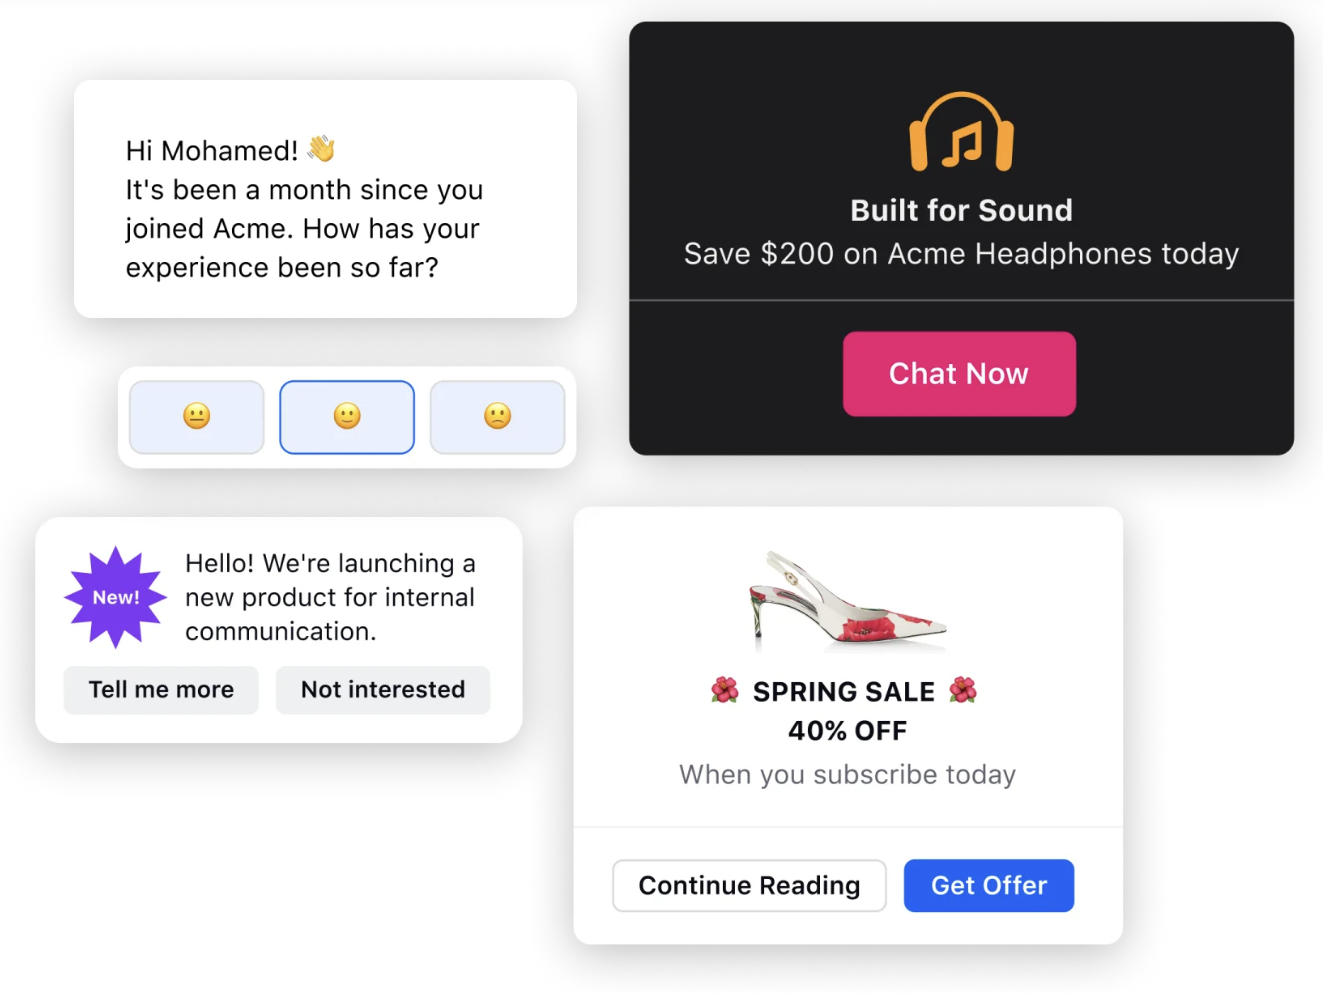 Customized product recommendations powered by Sprinklr AI+